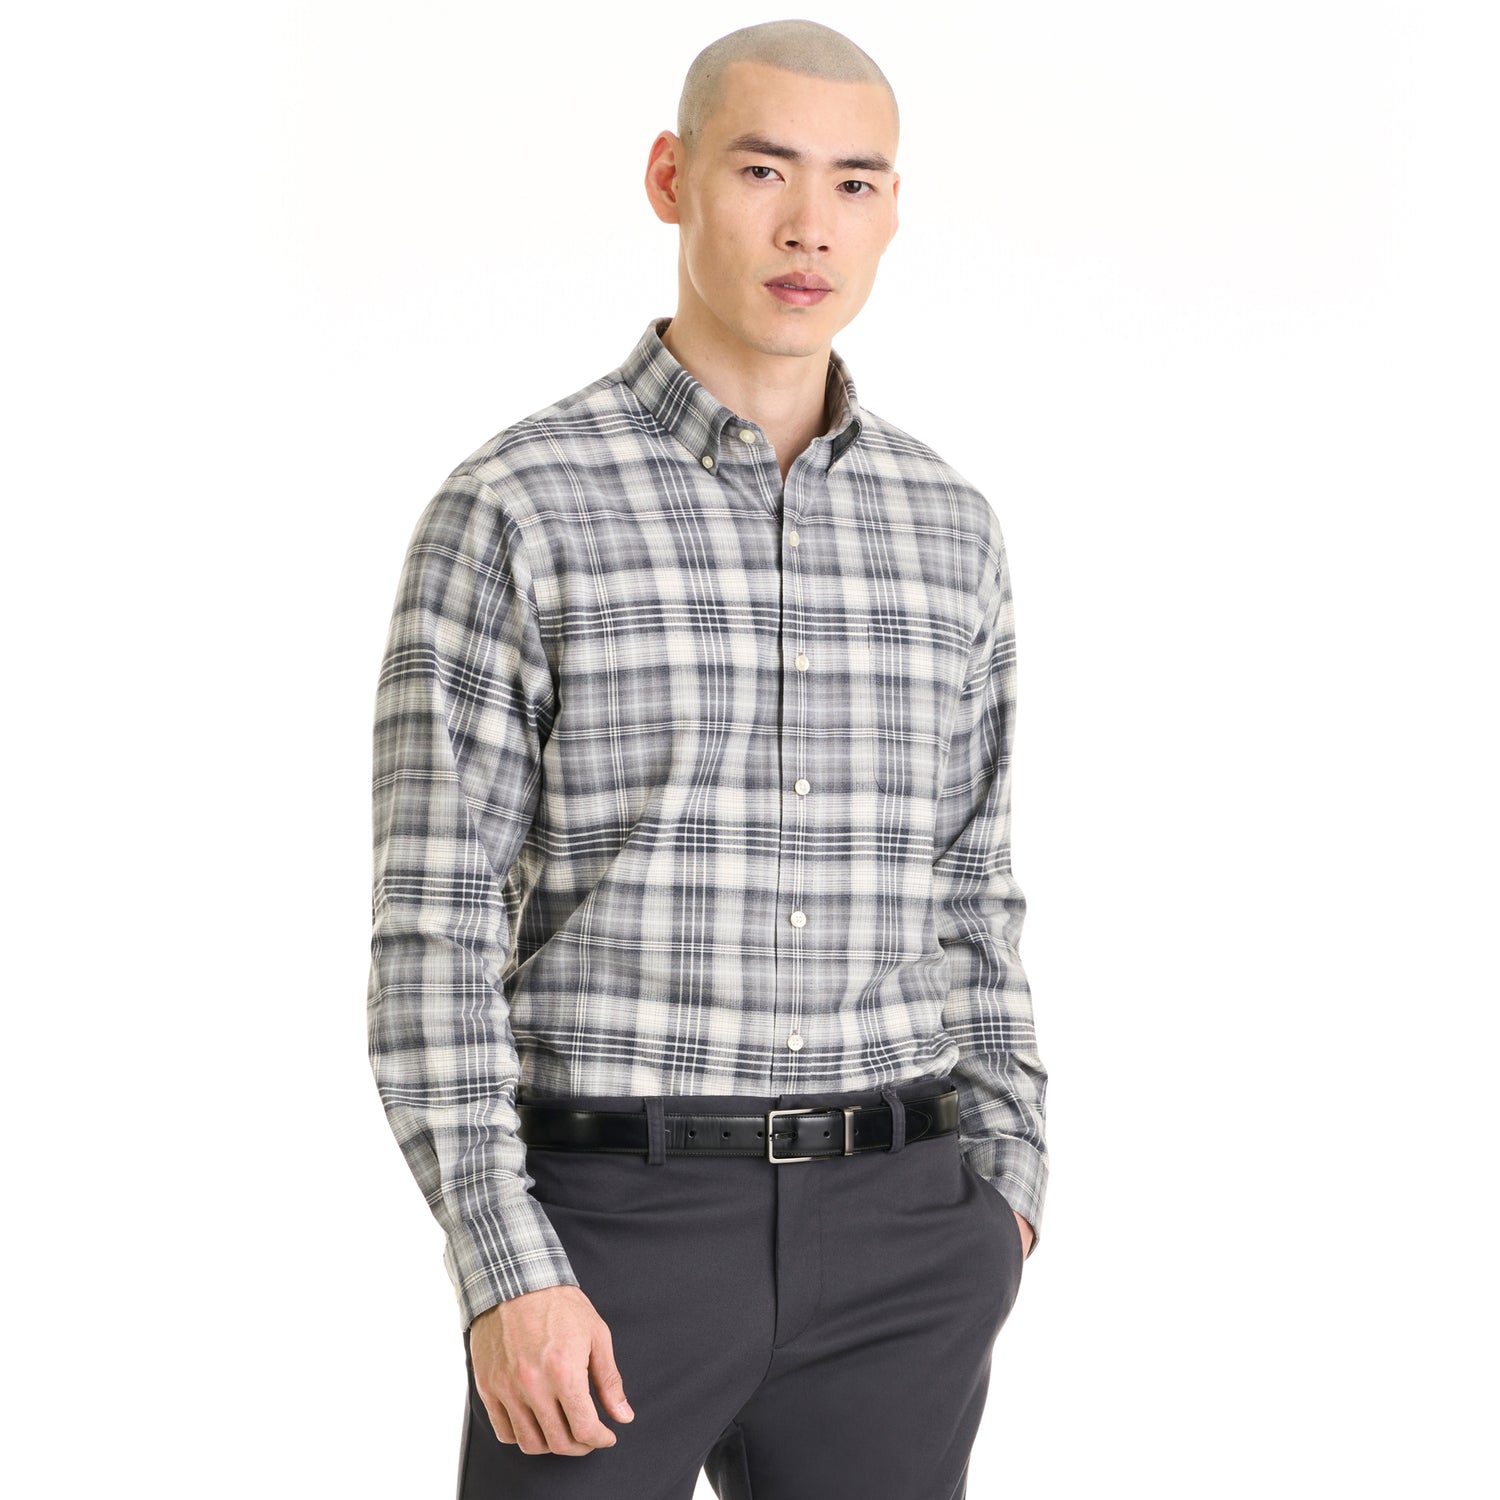 Weekend Twill Ombre Plaid Long Sleeve Button Up Top – Regular Fit